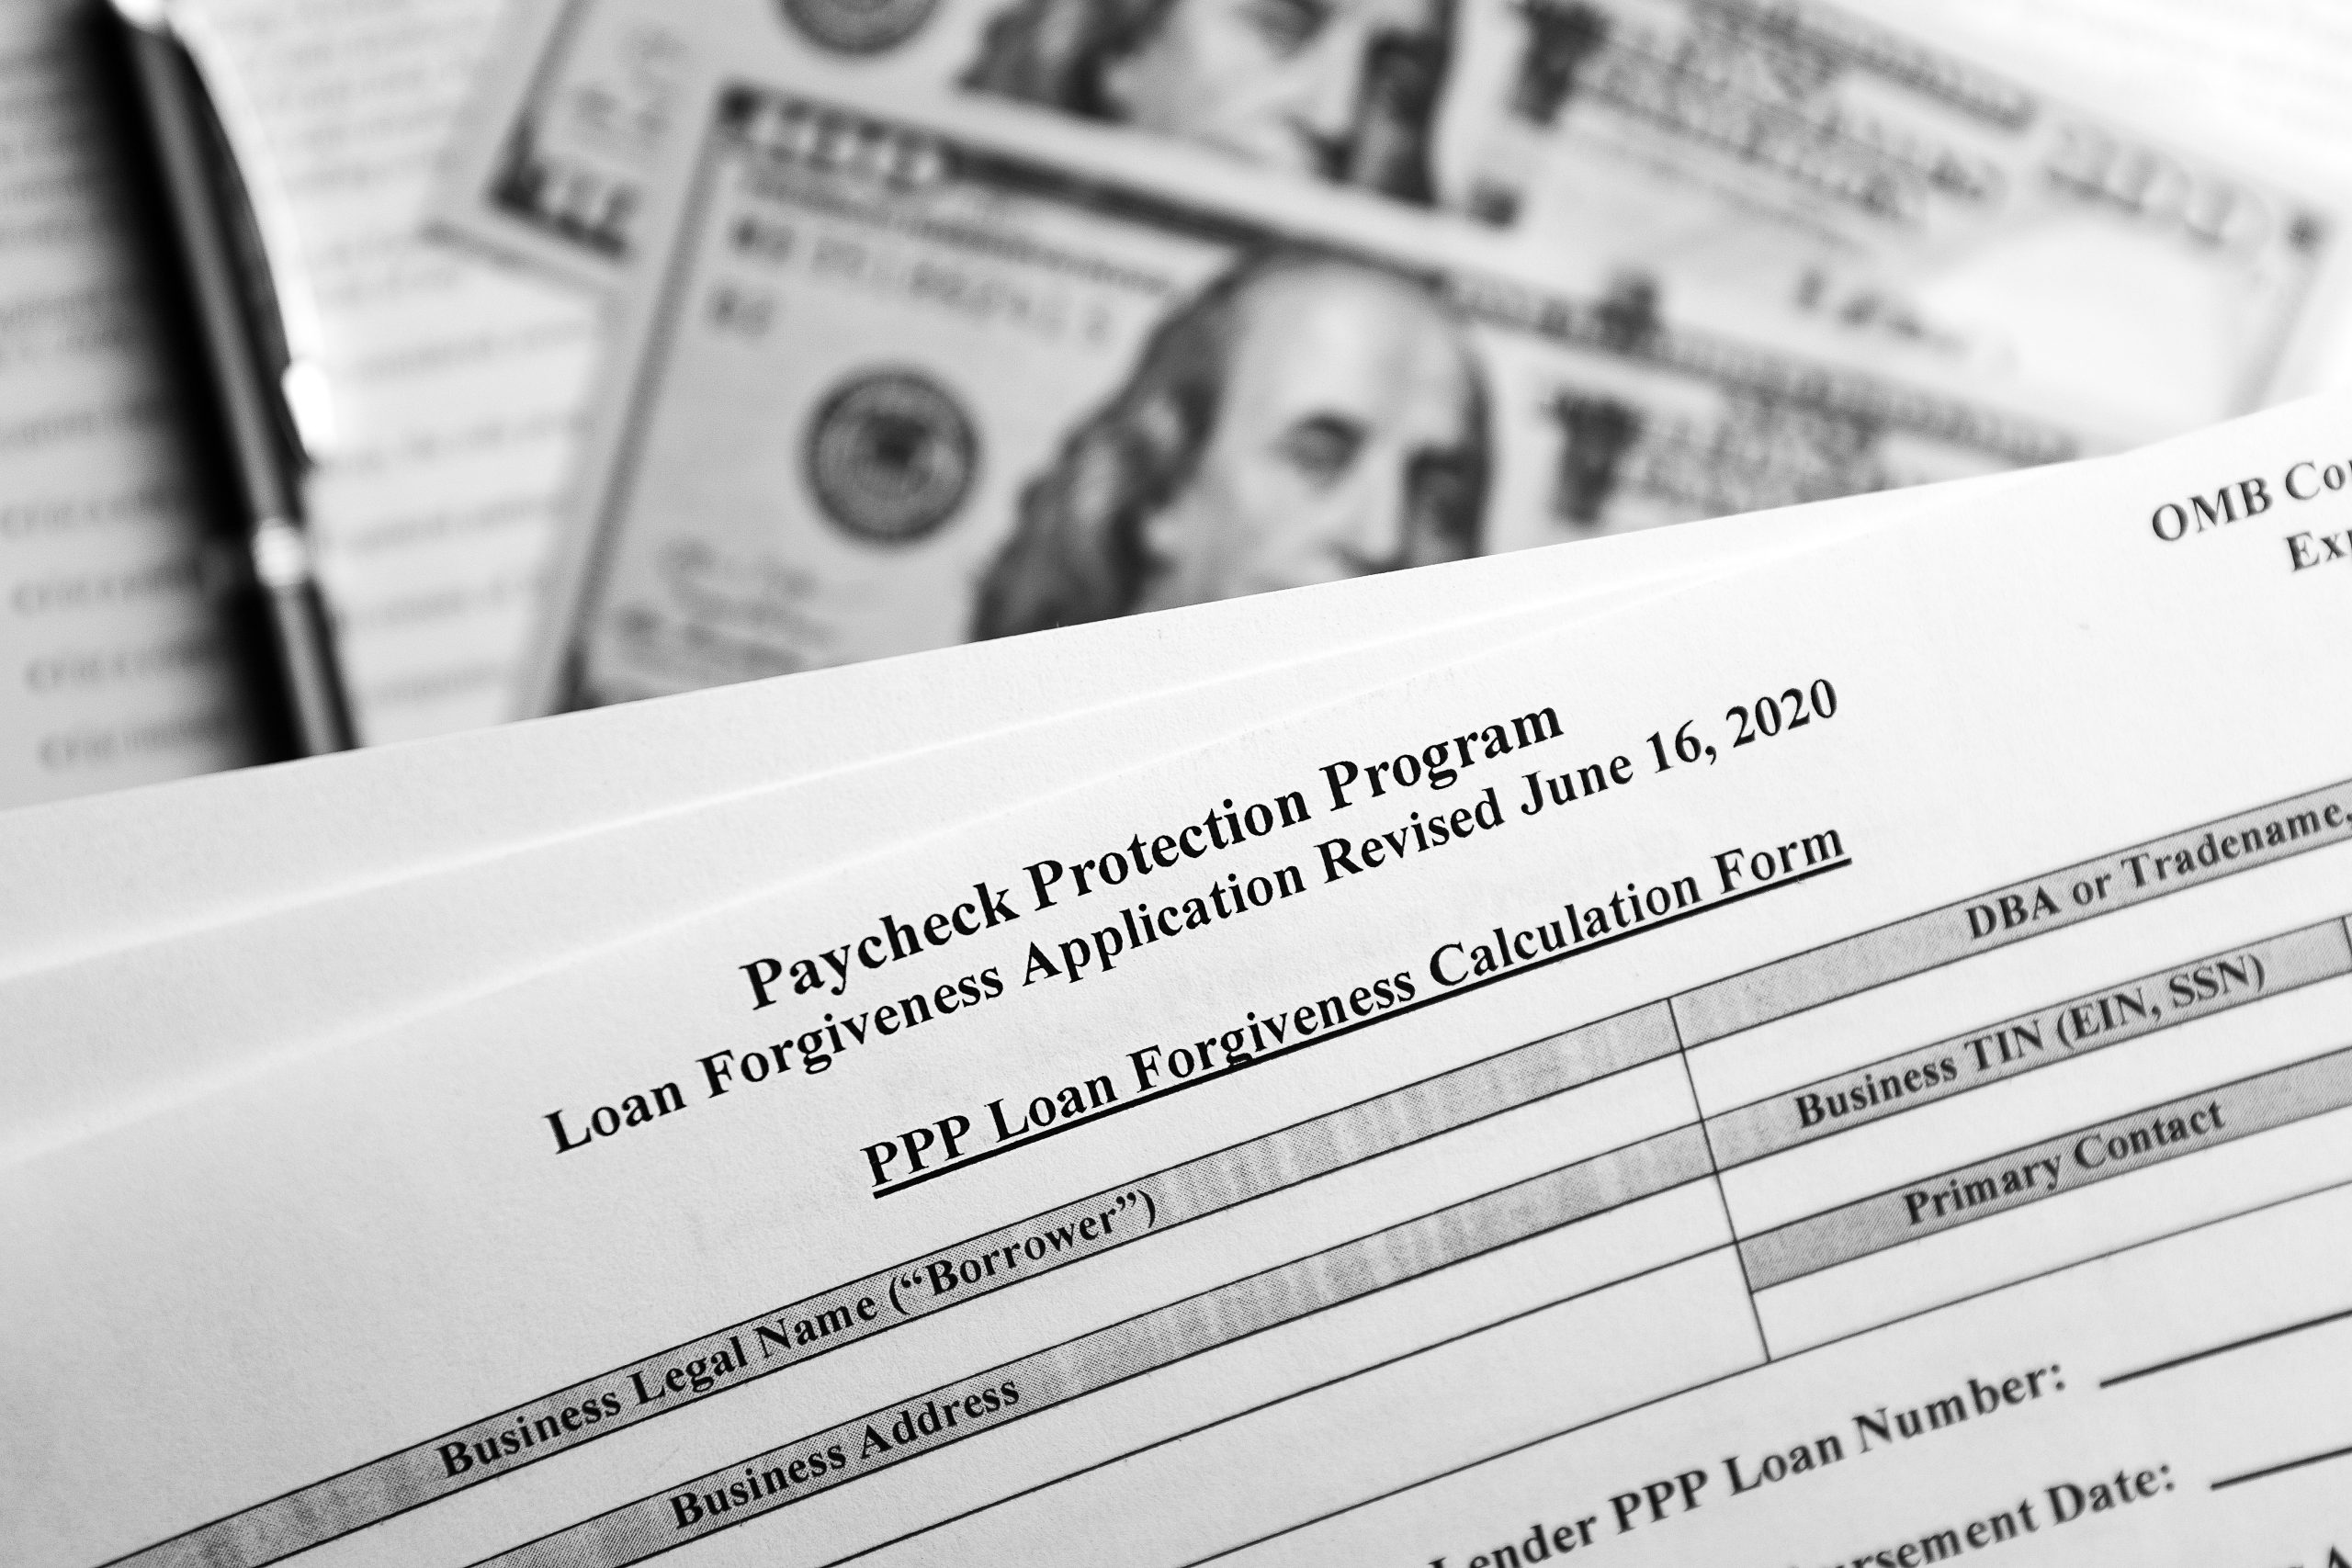 Loan Forgiveness under the Paycheck Protection Program